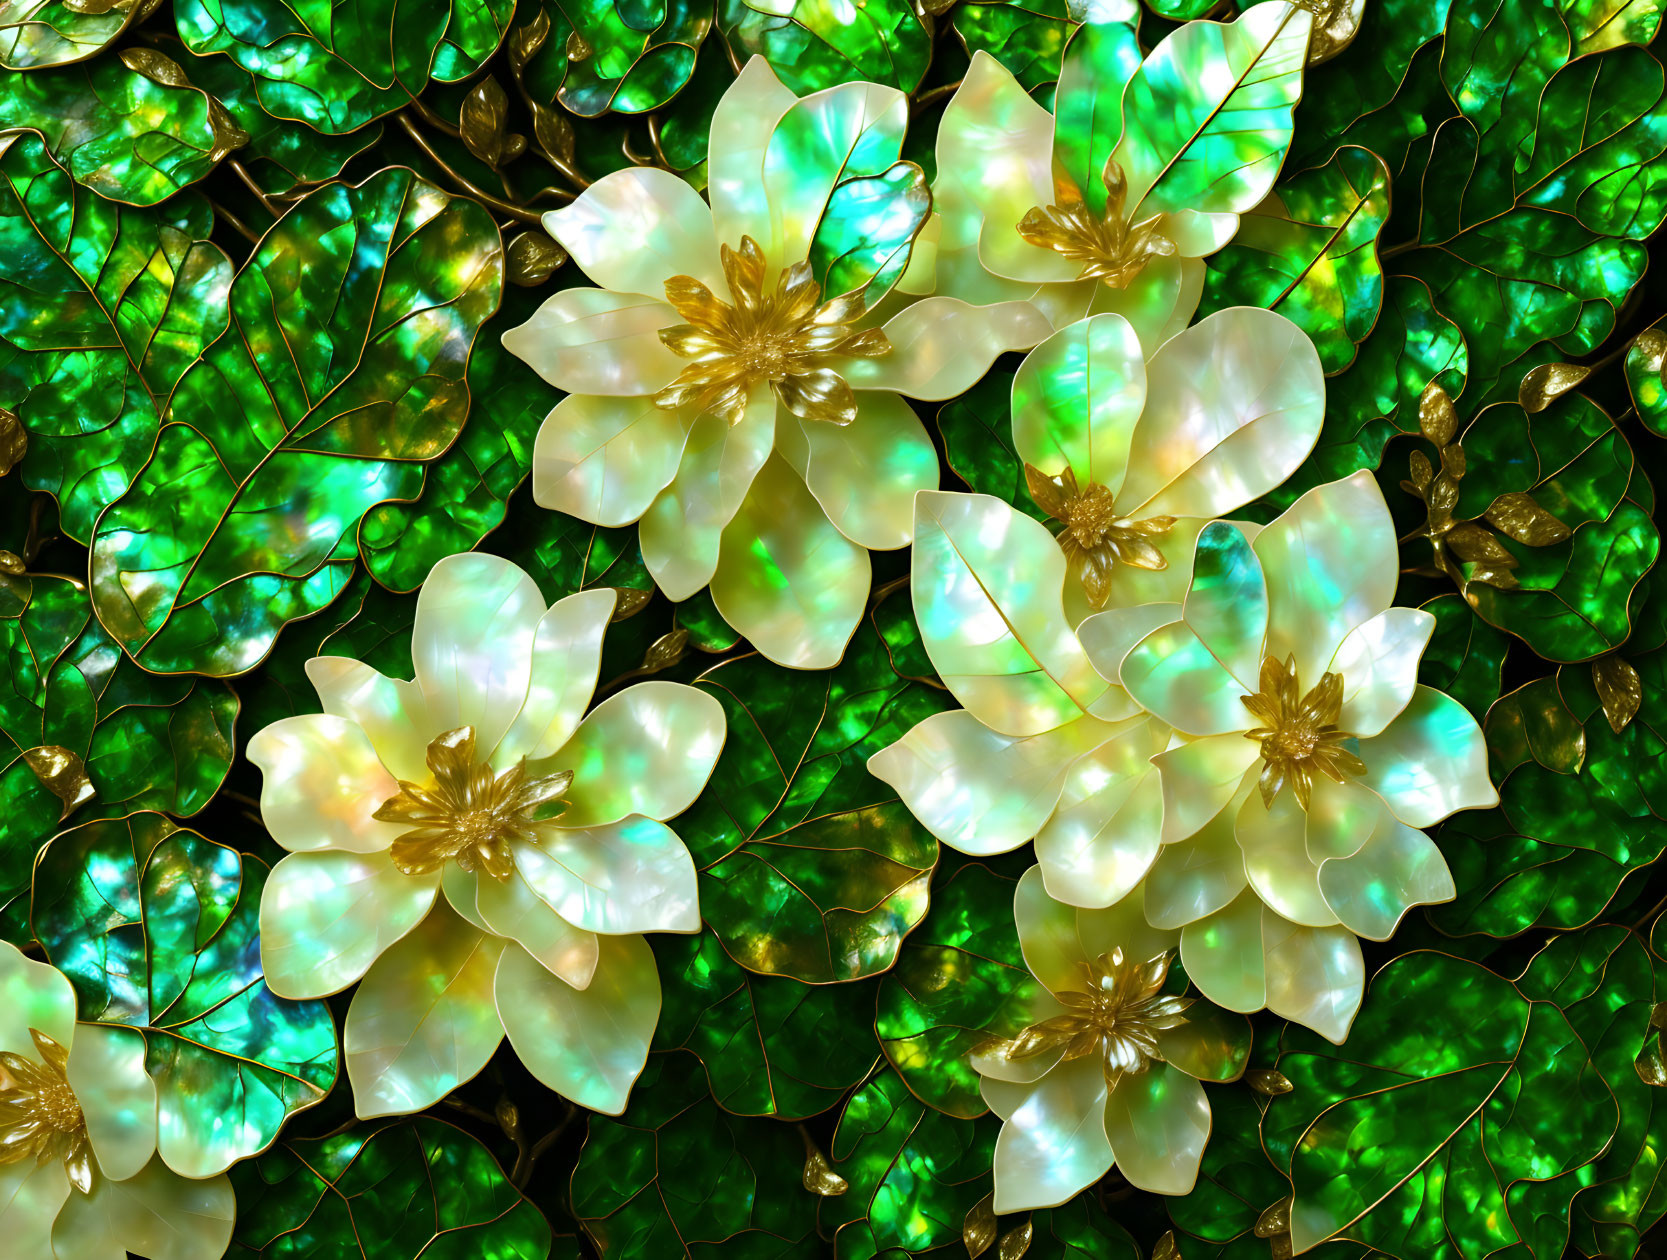 Close-up Image of Iridescent White Flowers with Golden Stamens